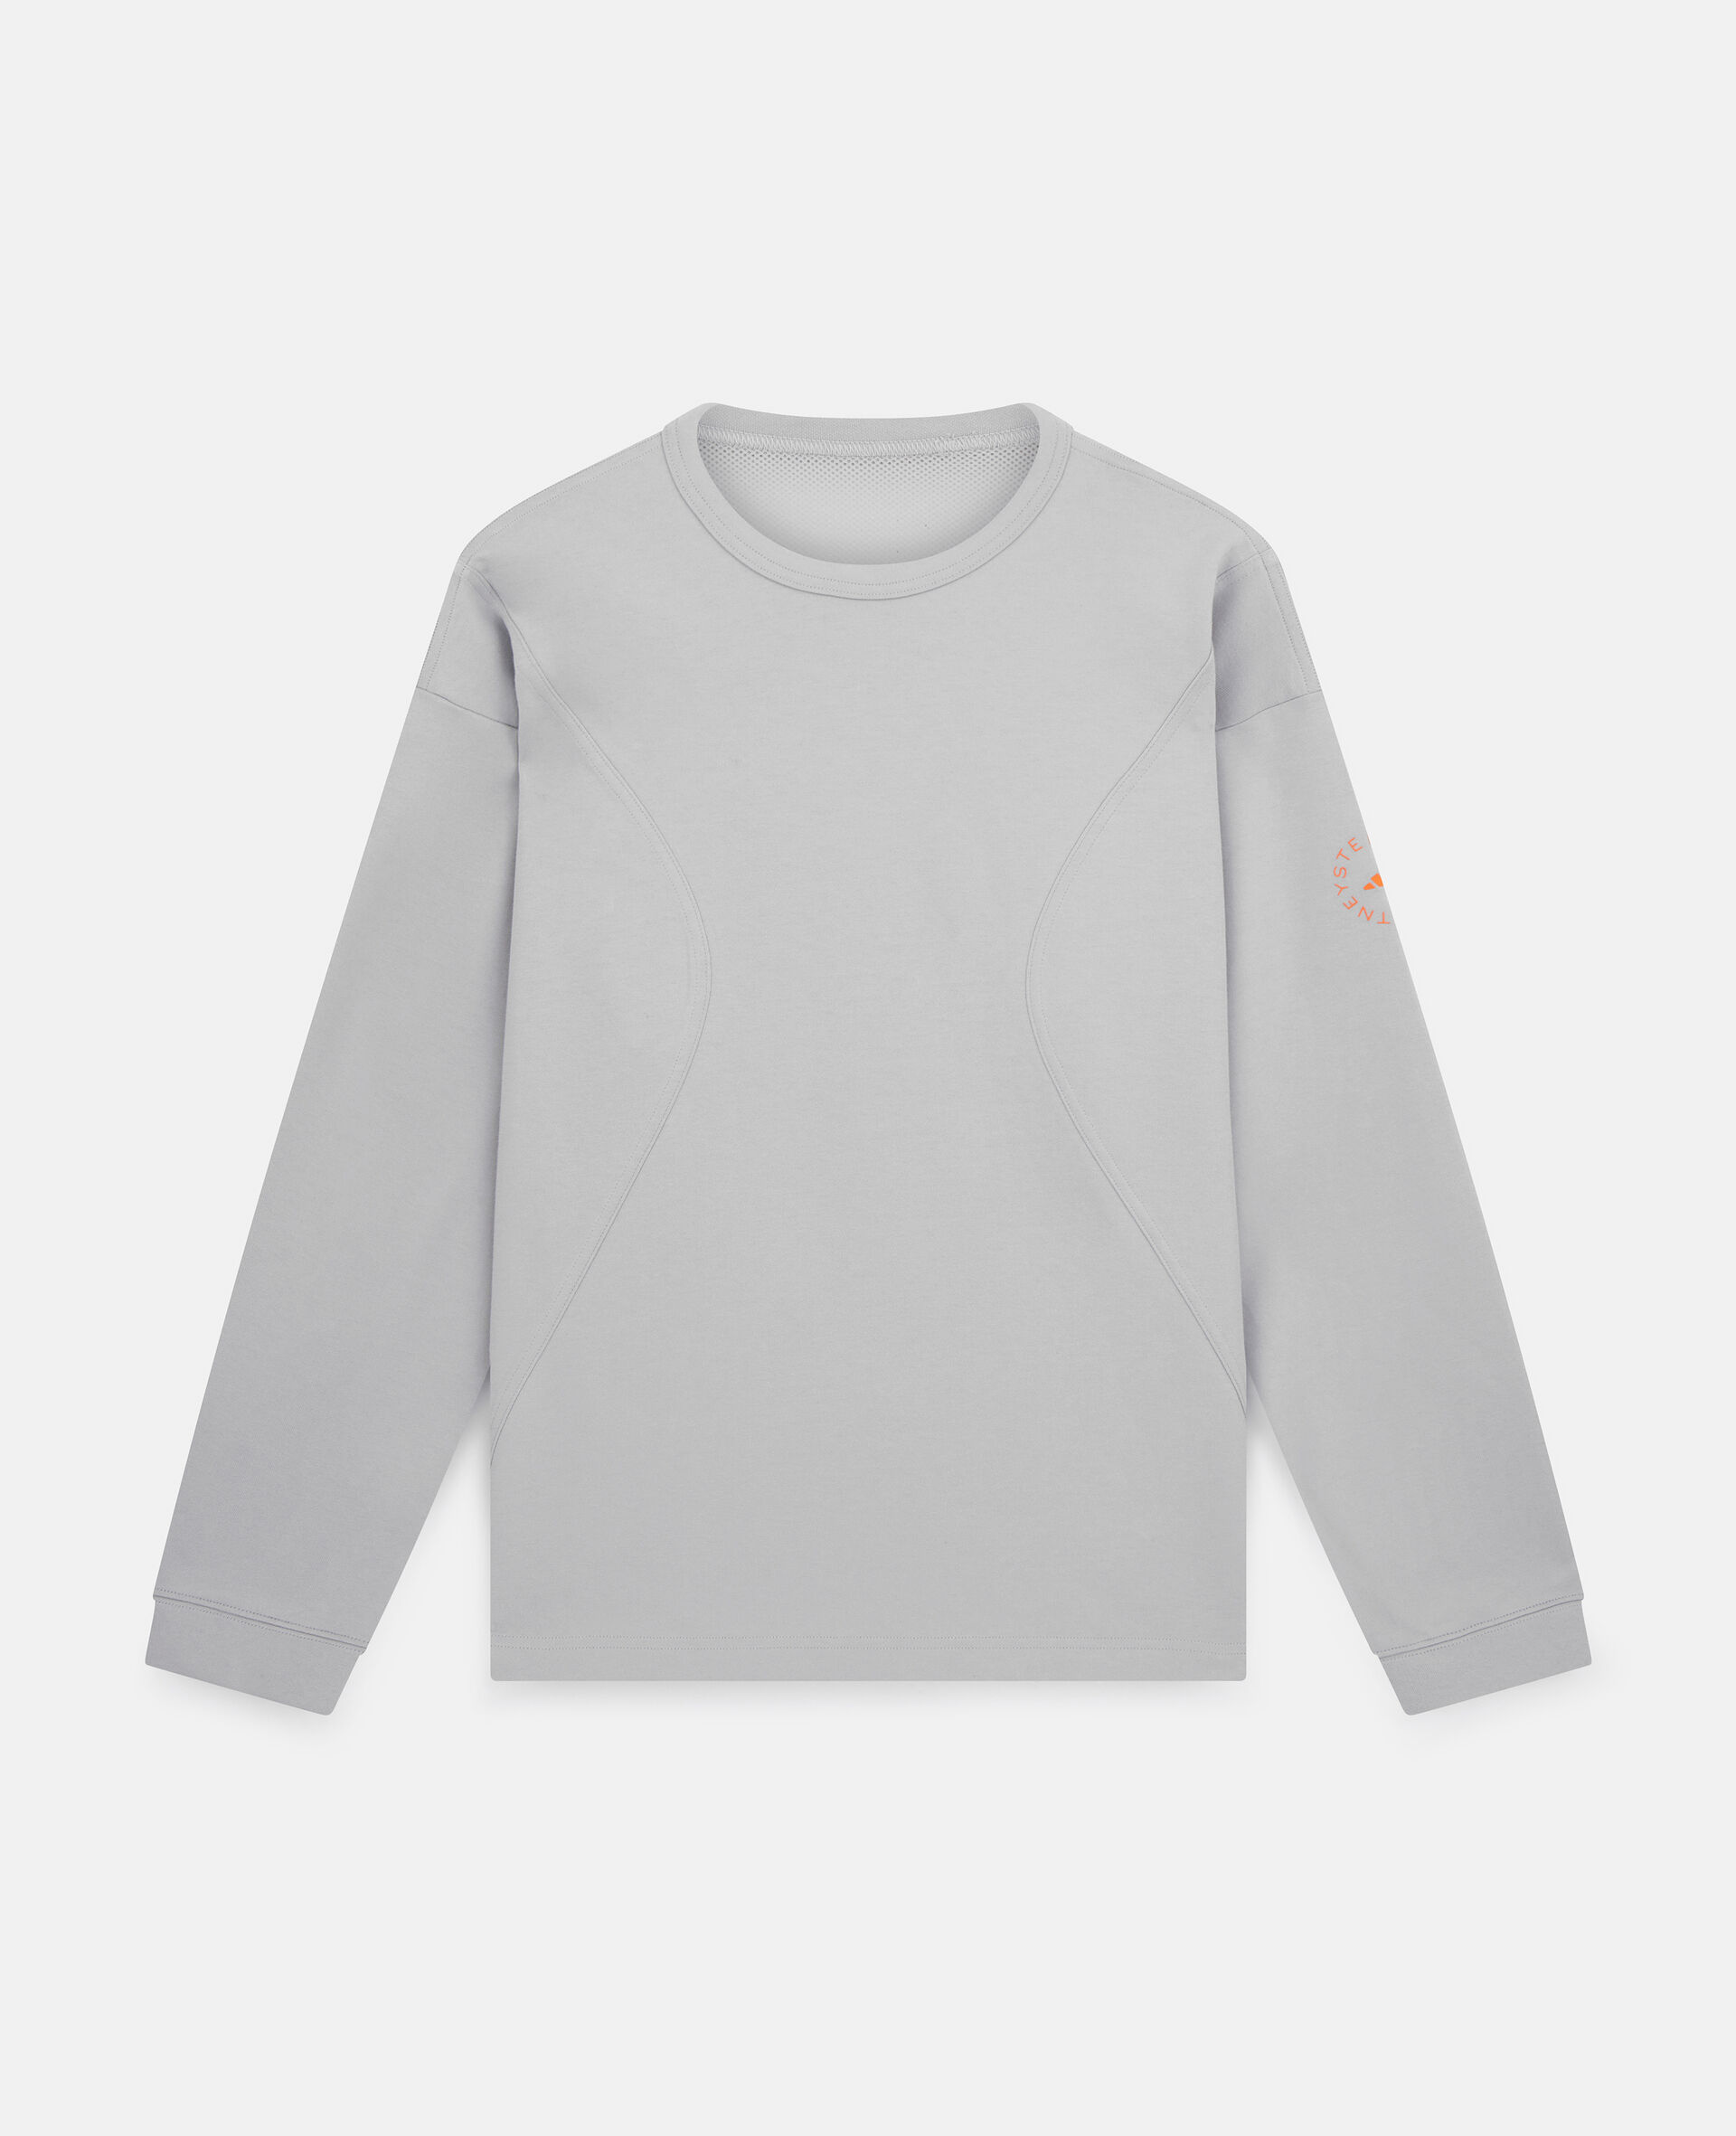 Long-Sleeve Sports Top-Grey-large image number 0